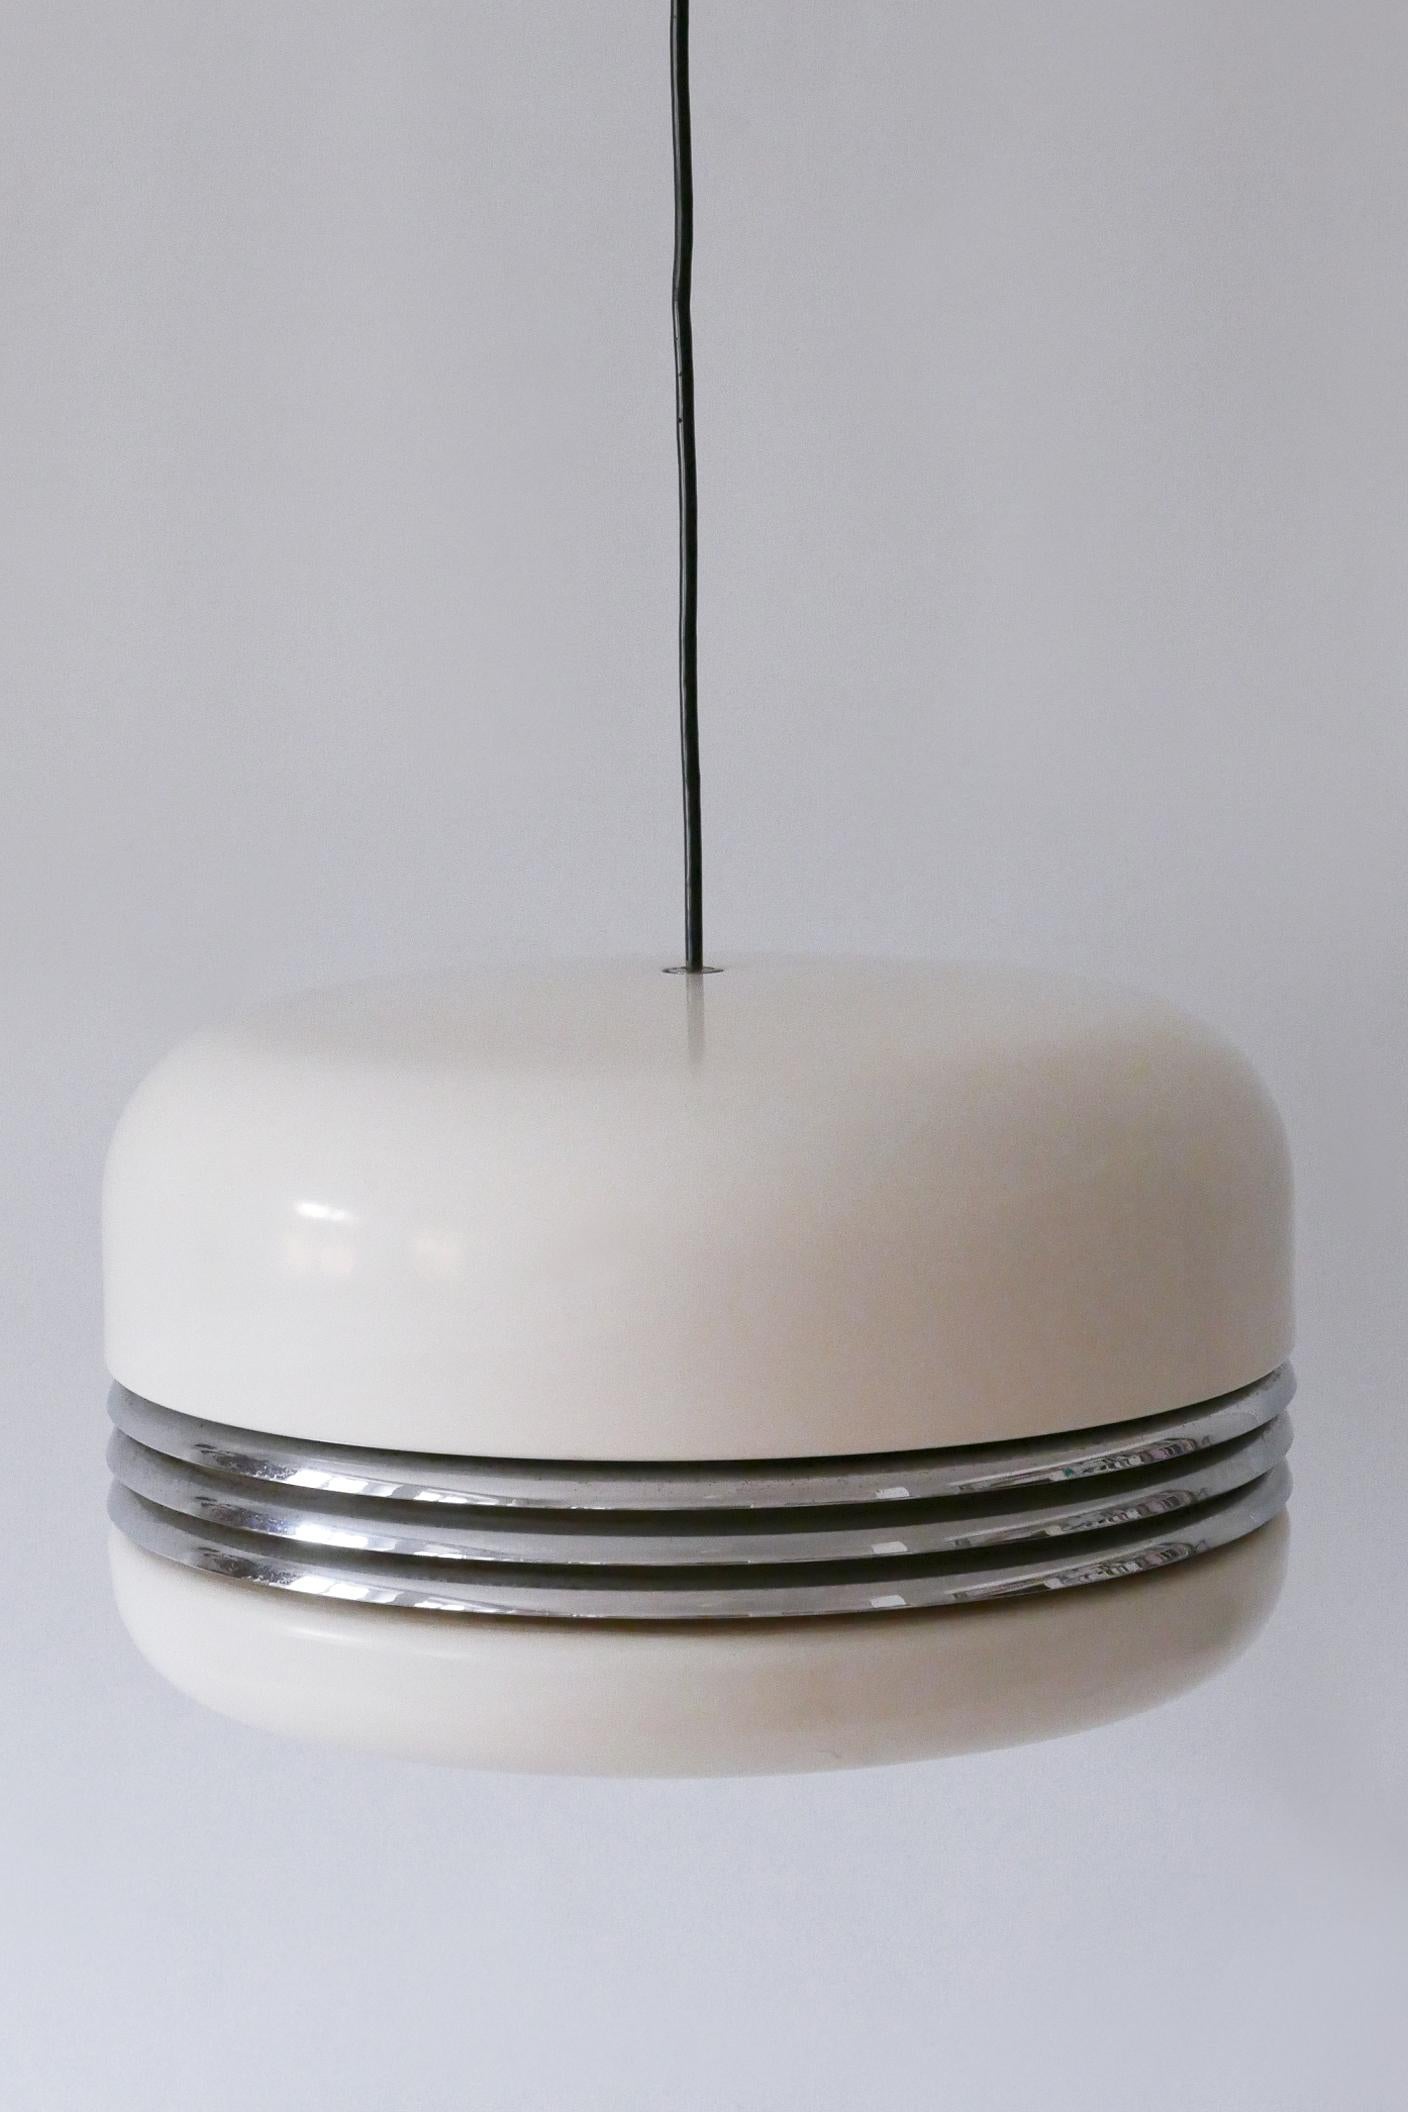 Large Pendant Lamp '5526' by Alfred Kalthoff für Staff & Schwarz Germany 1960s For Sale 8